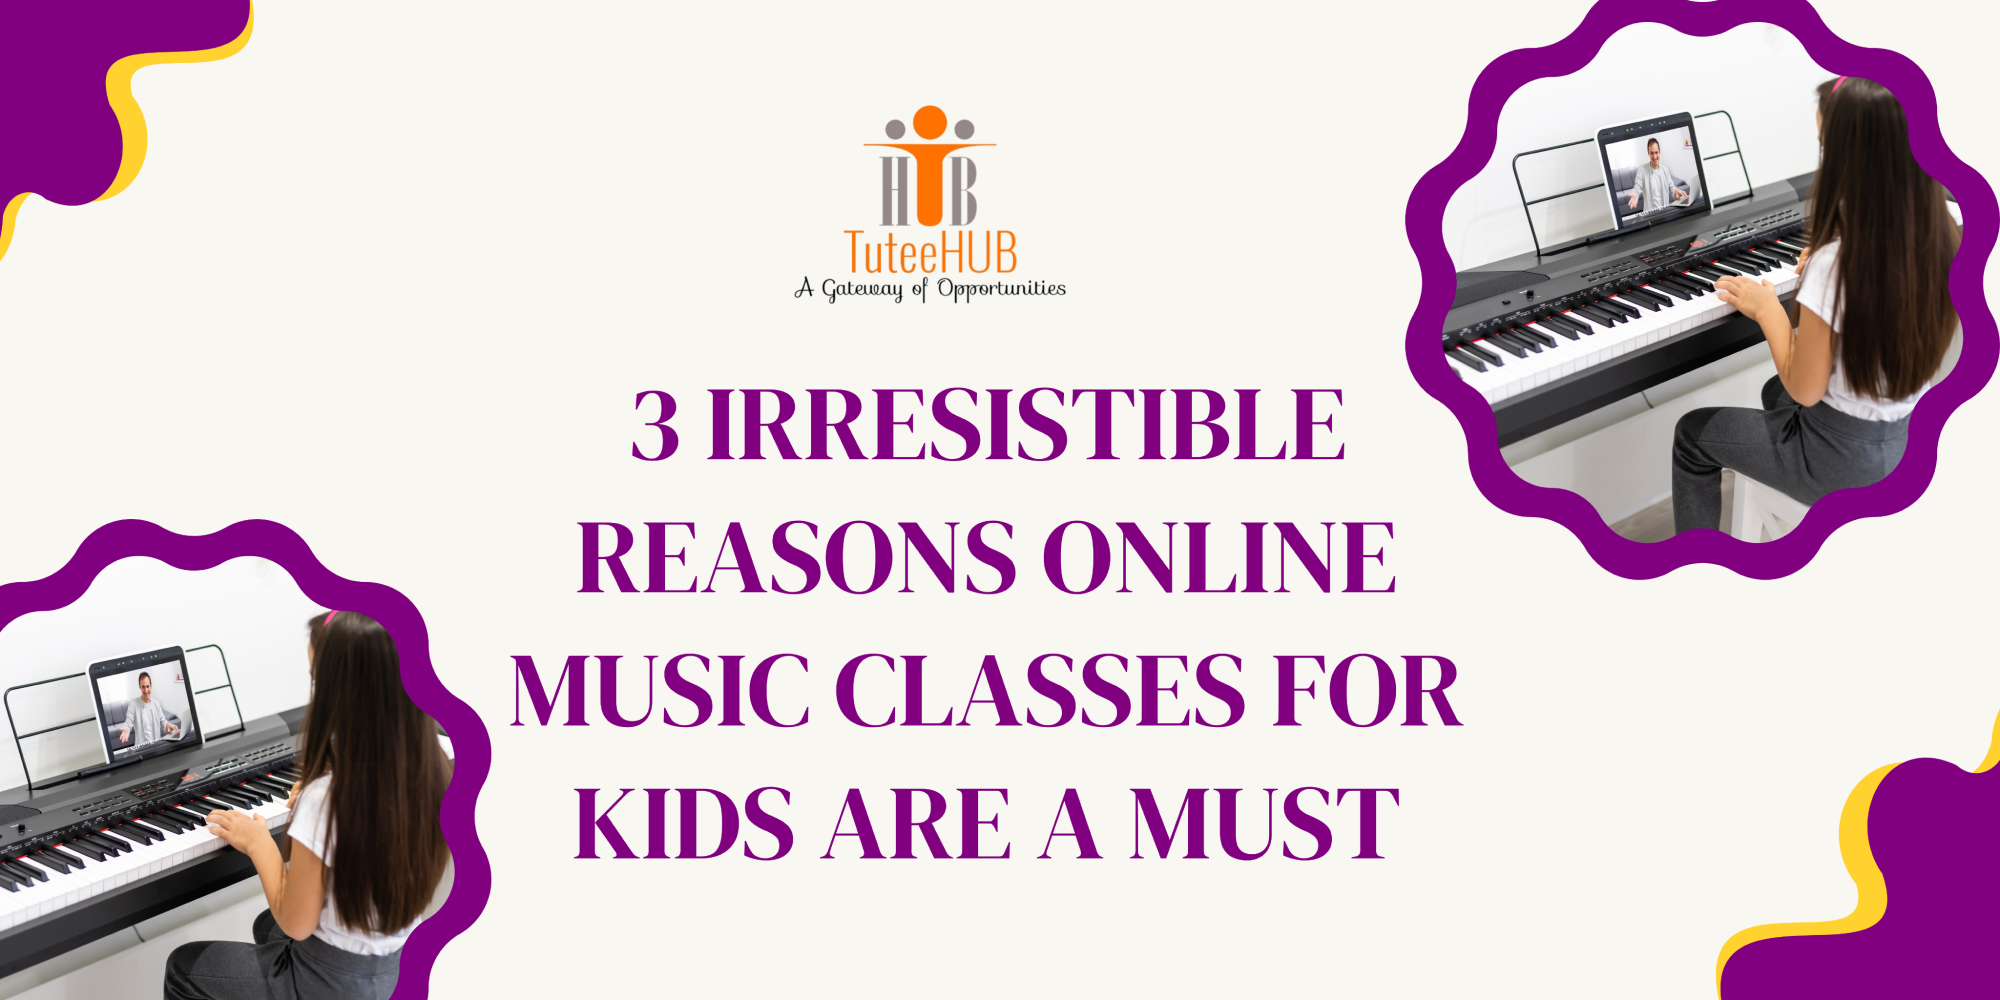 2 3 Irresistible Reasons Online Music Classes for Kids Are a Must